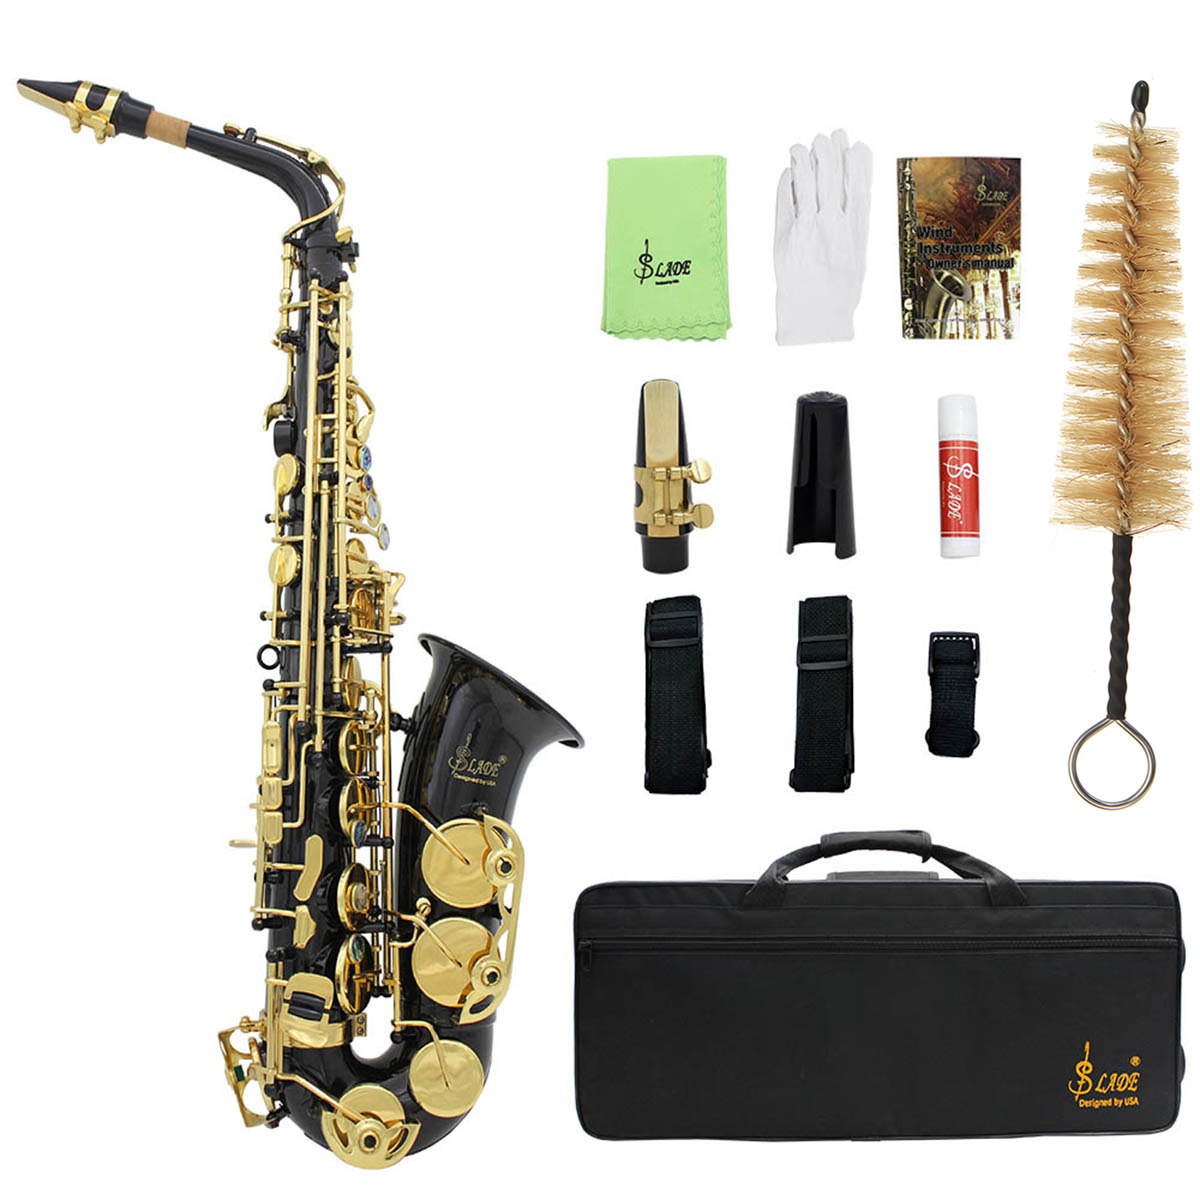 Brass-Engraved-Eb-E-Flat-Alto-Saxophone-Sax-With-Case-Gloves-Cleaning-Cloth-Belt-Brush-1428785